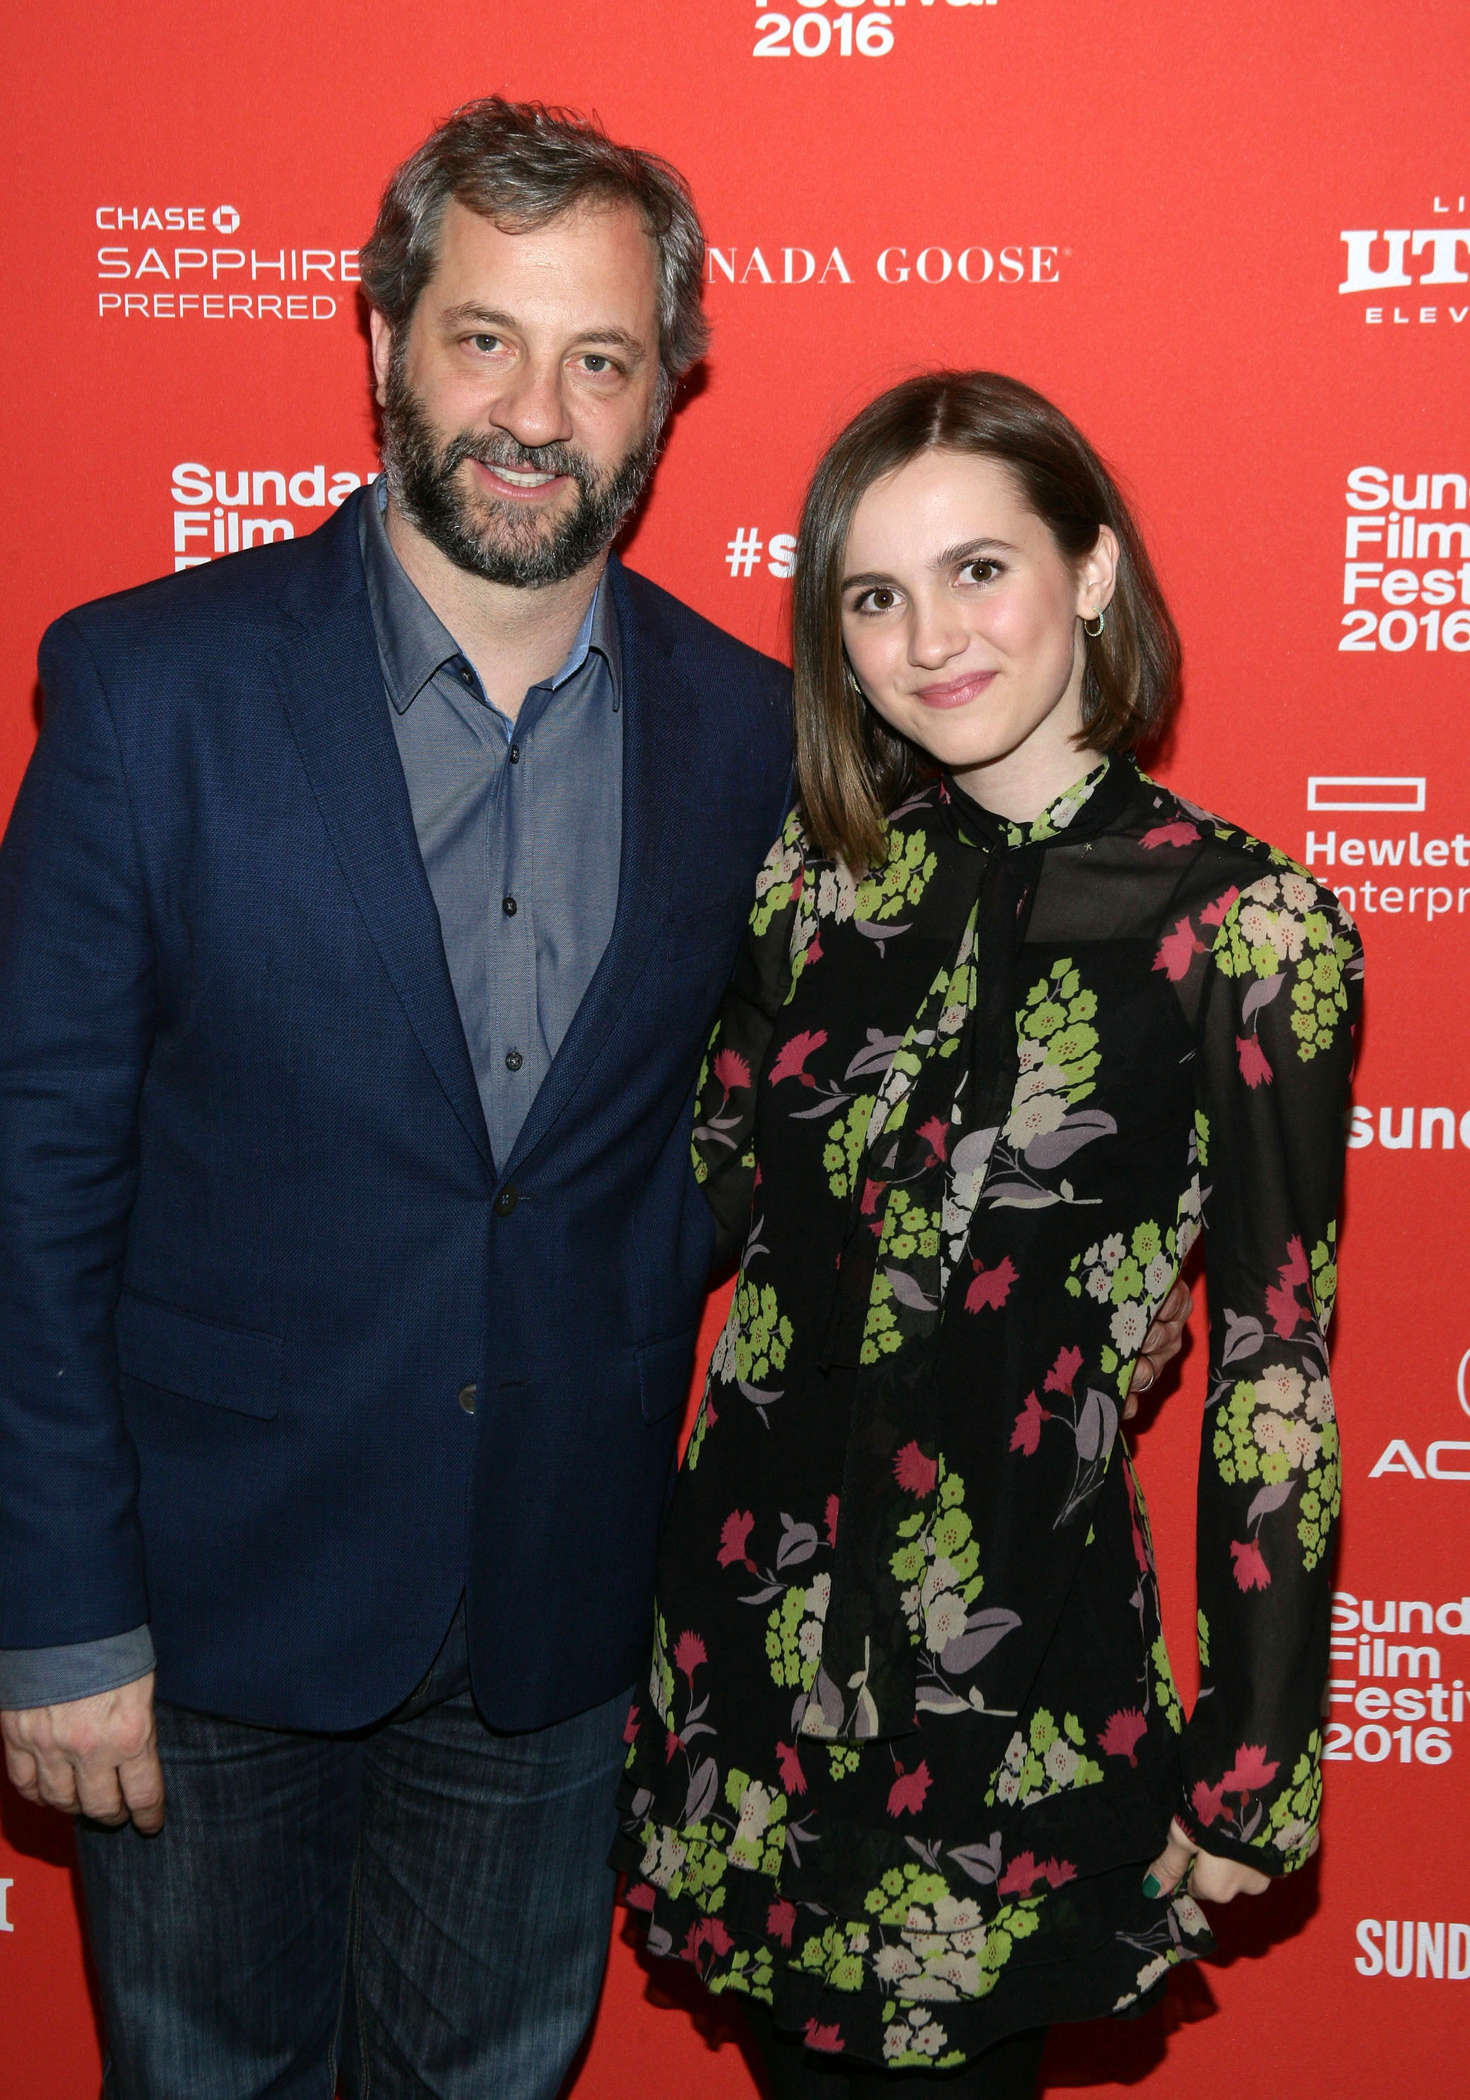 Maude Apatow Other People Premiere at Sundance Film Festival in Park City.